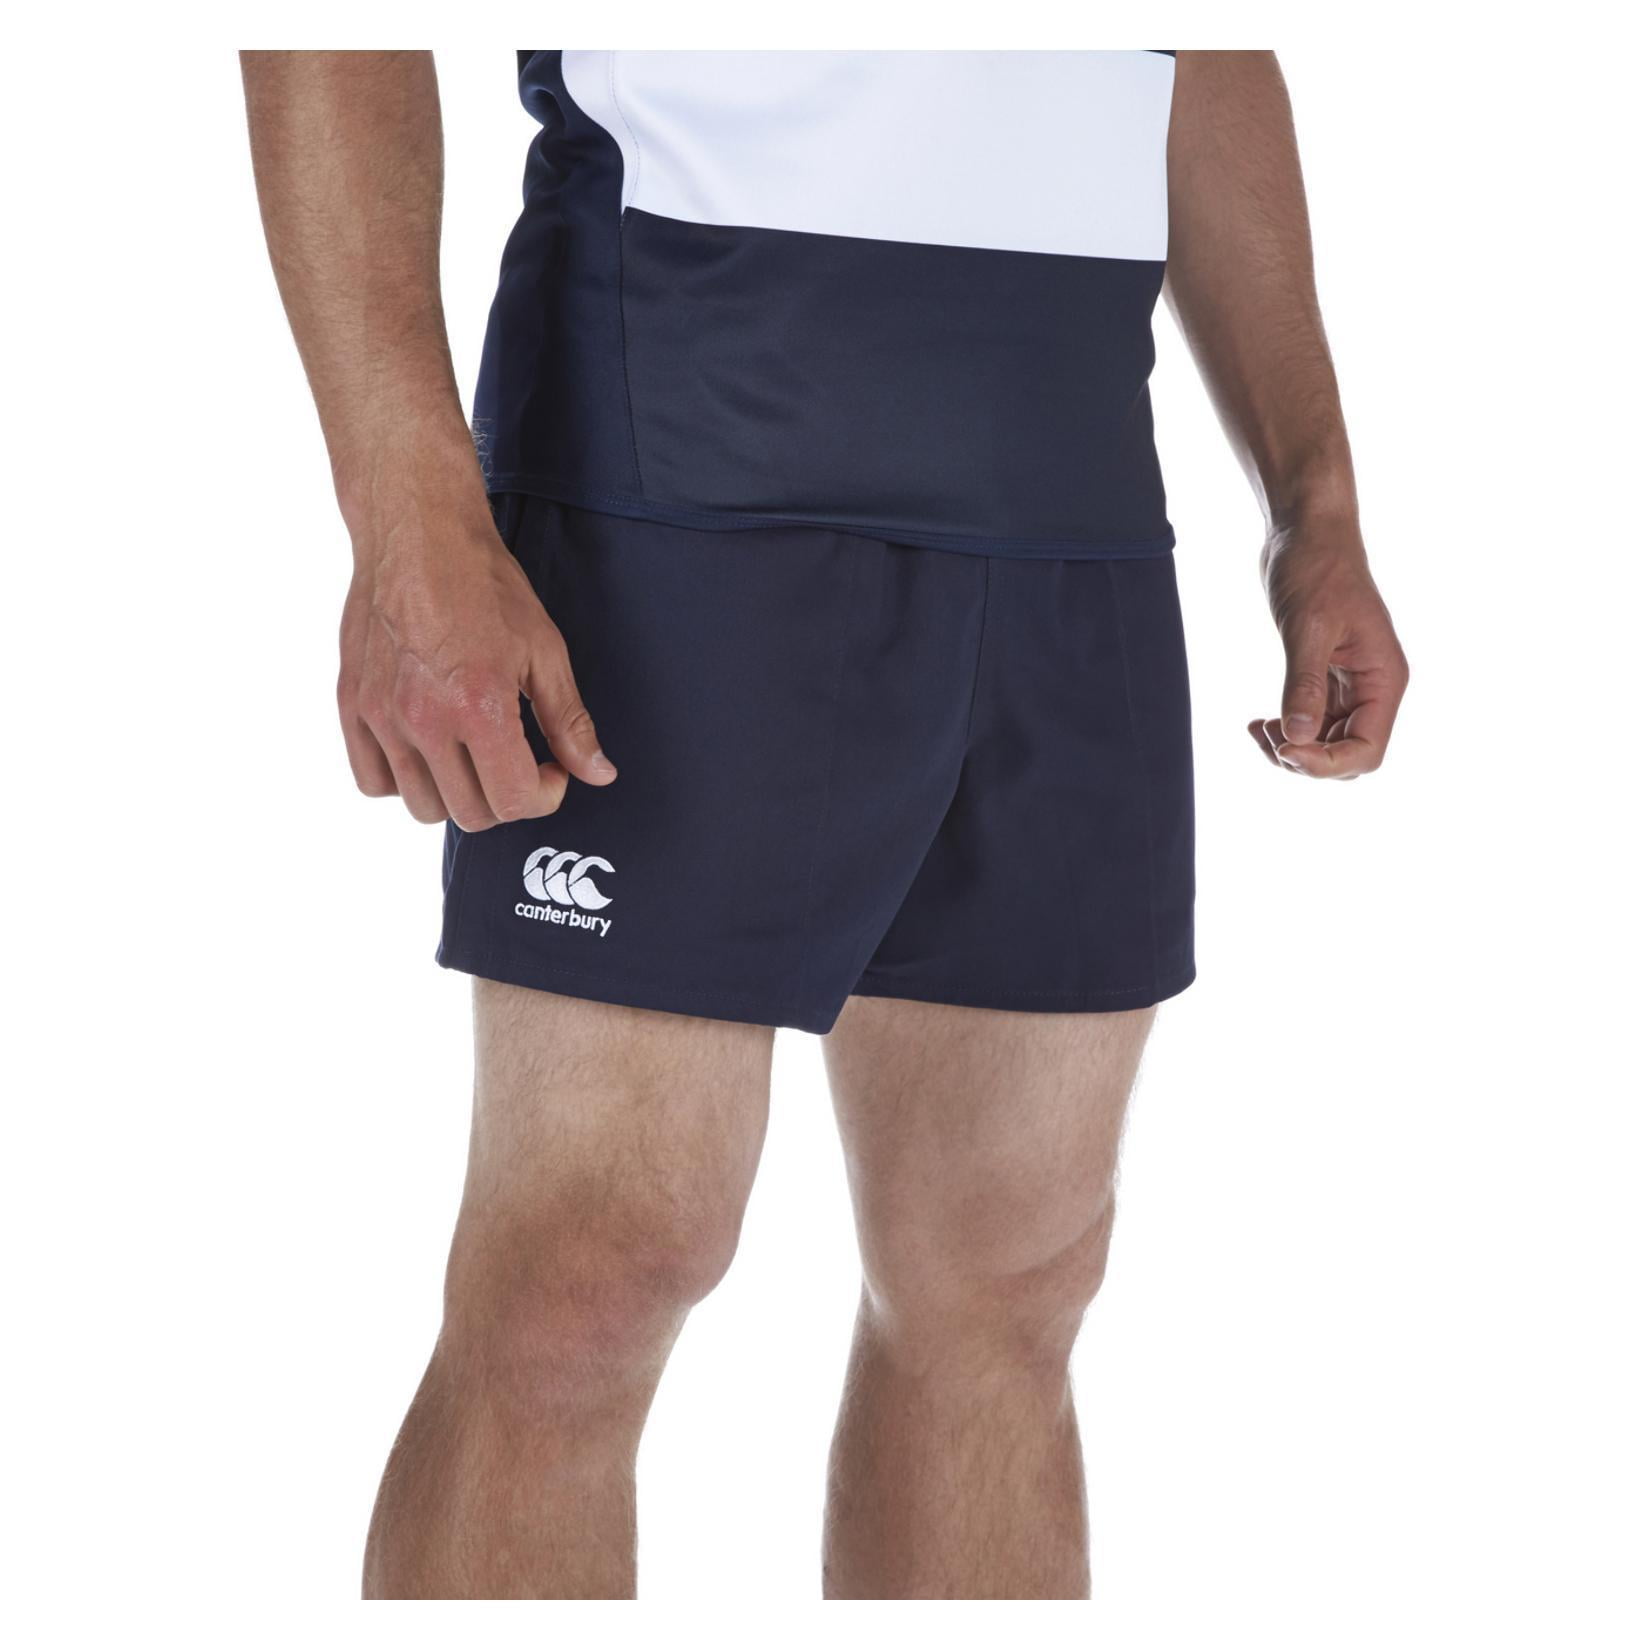 Nrl rugby shorts teens age 14 years assorted 